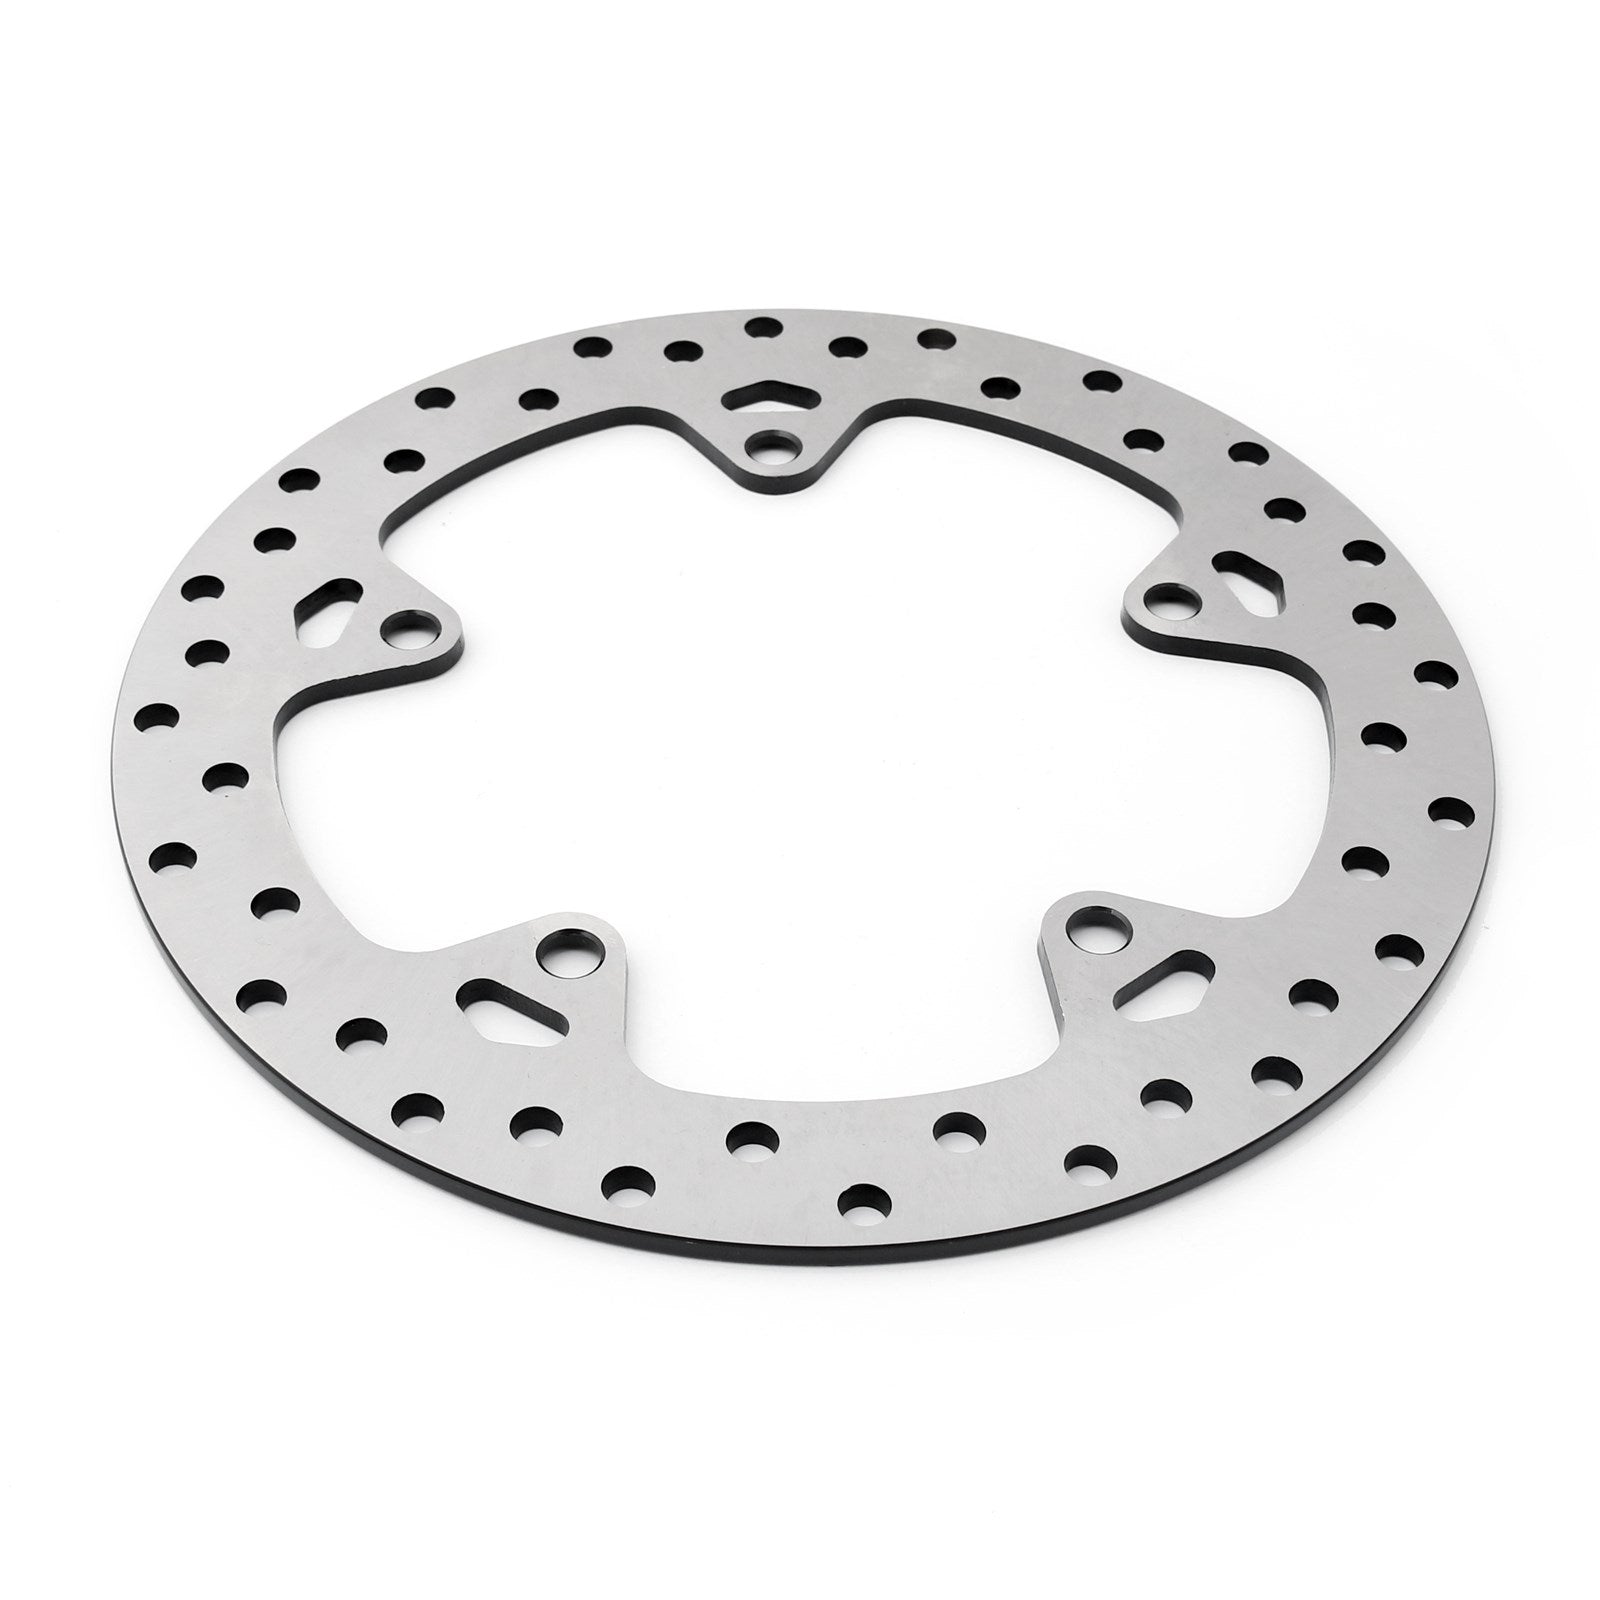 Rear Brake Rotor Disc Fit for BMW F 650 700 800 GS F800 R/S/ST/GT R nineT 06-15